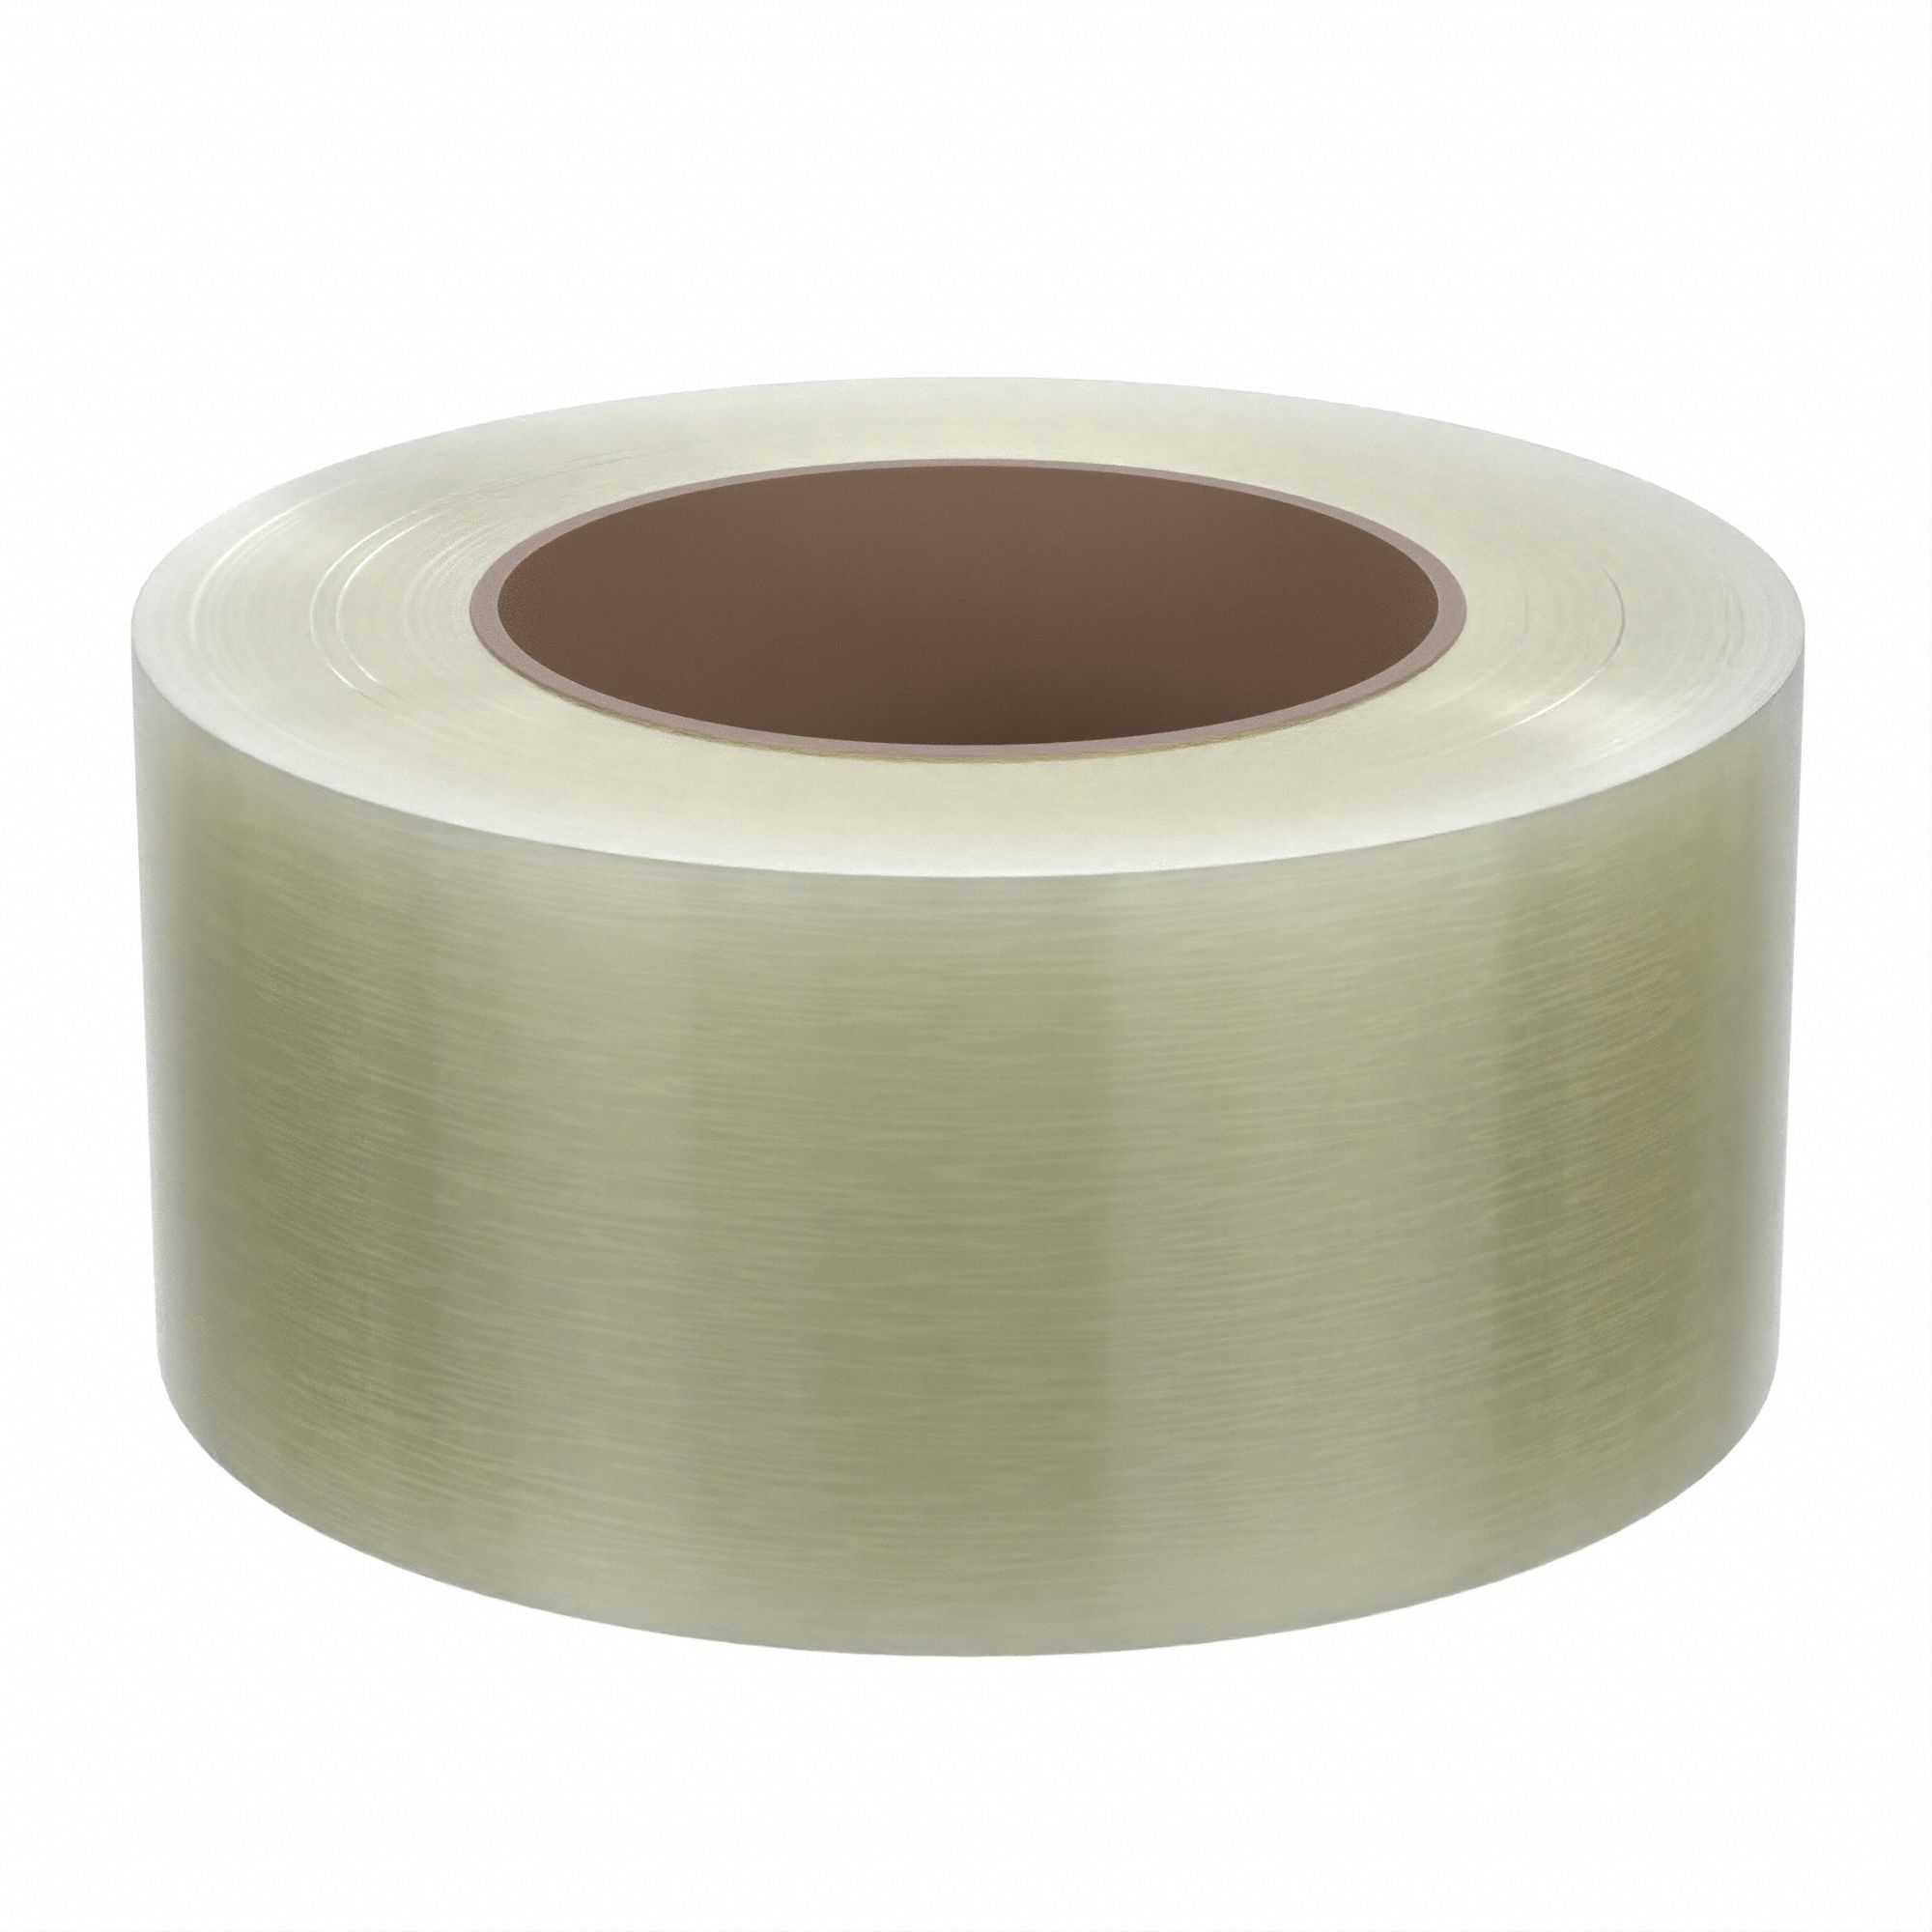 Heavy Duty Packing Tape, Clear 2.6 Mil 3 inch x 110 Yards, Extra Strength Refill for Packing and Shipping 24 Rolls per Order